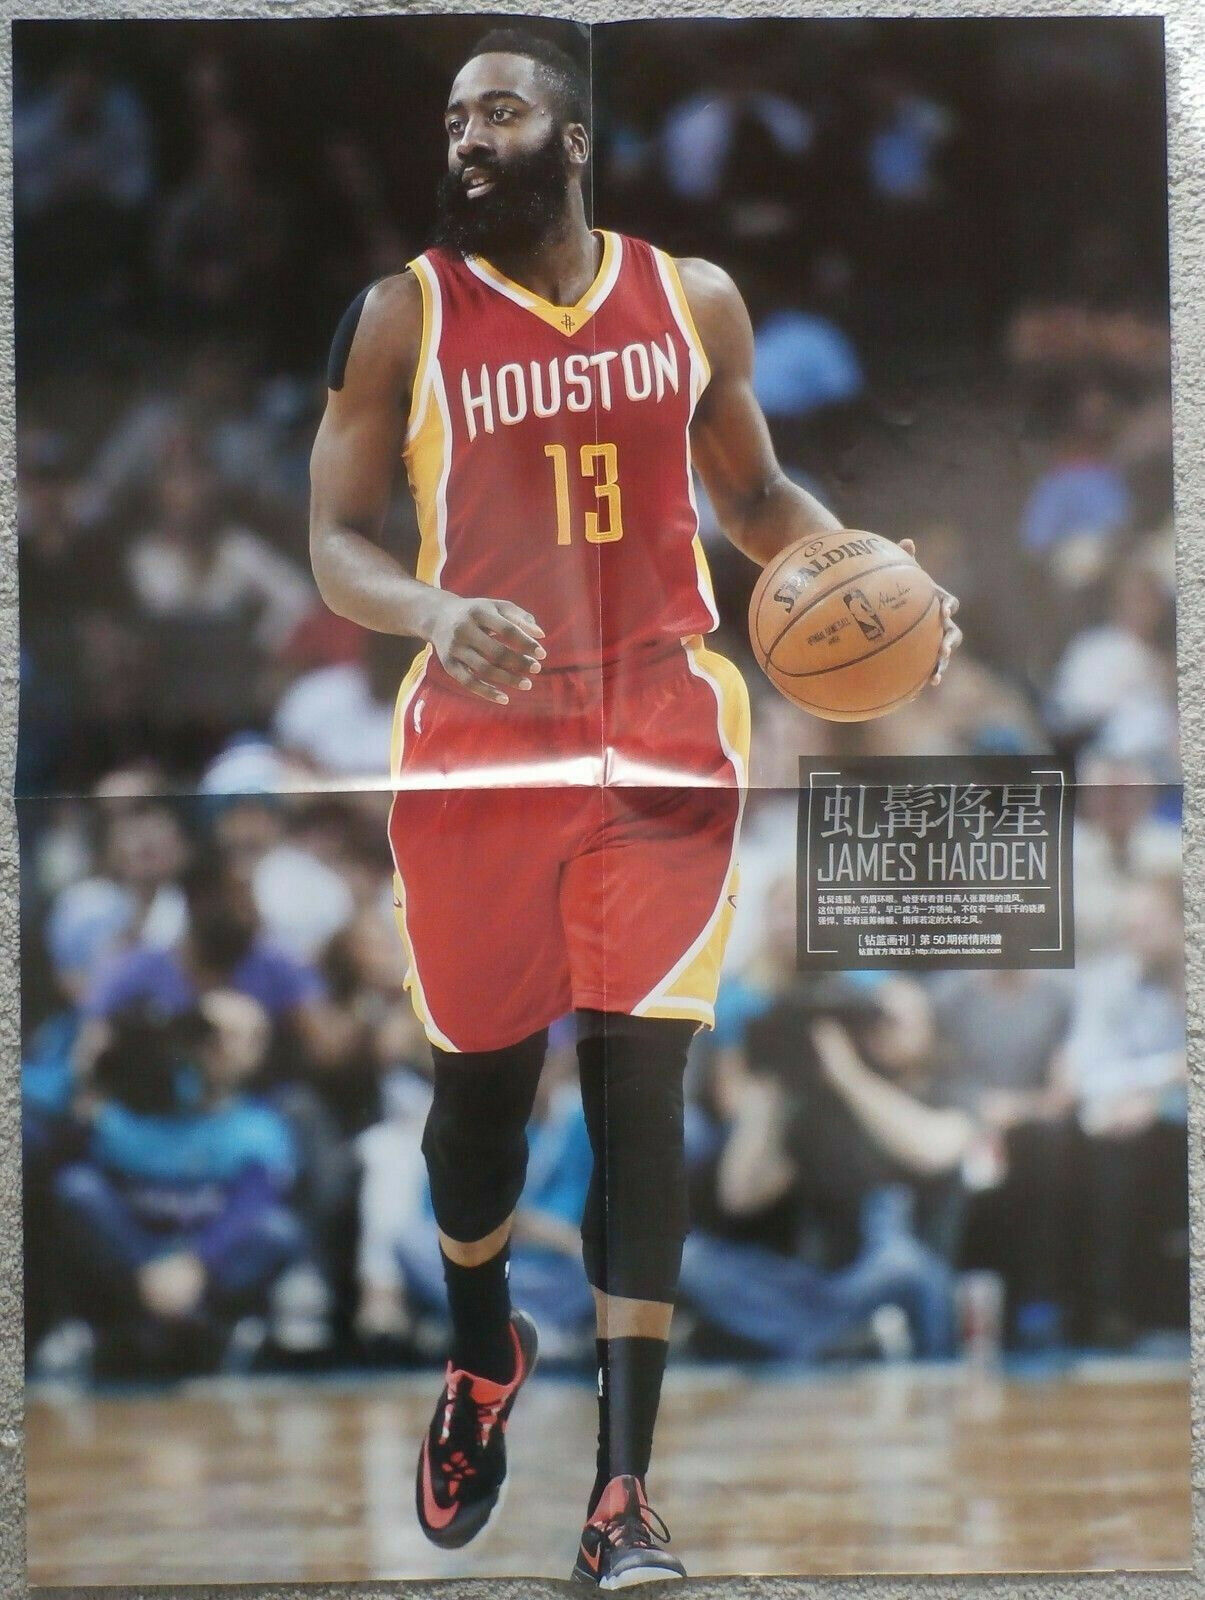 CHINA Poster - JAMES HARDEN - HOUSTON ROCKETS - CHINESE POSTER